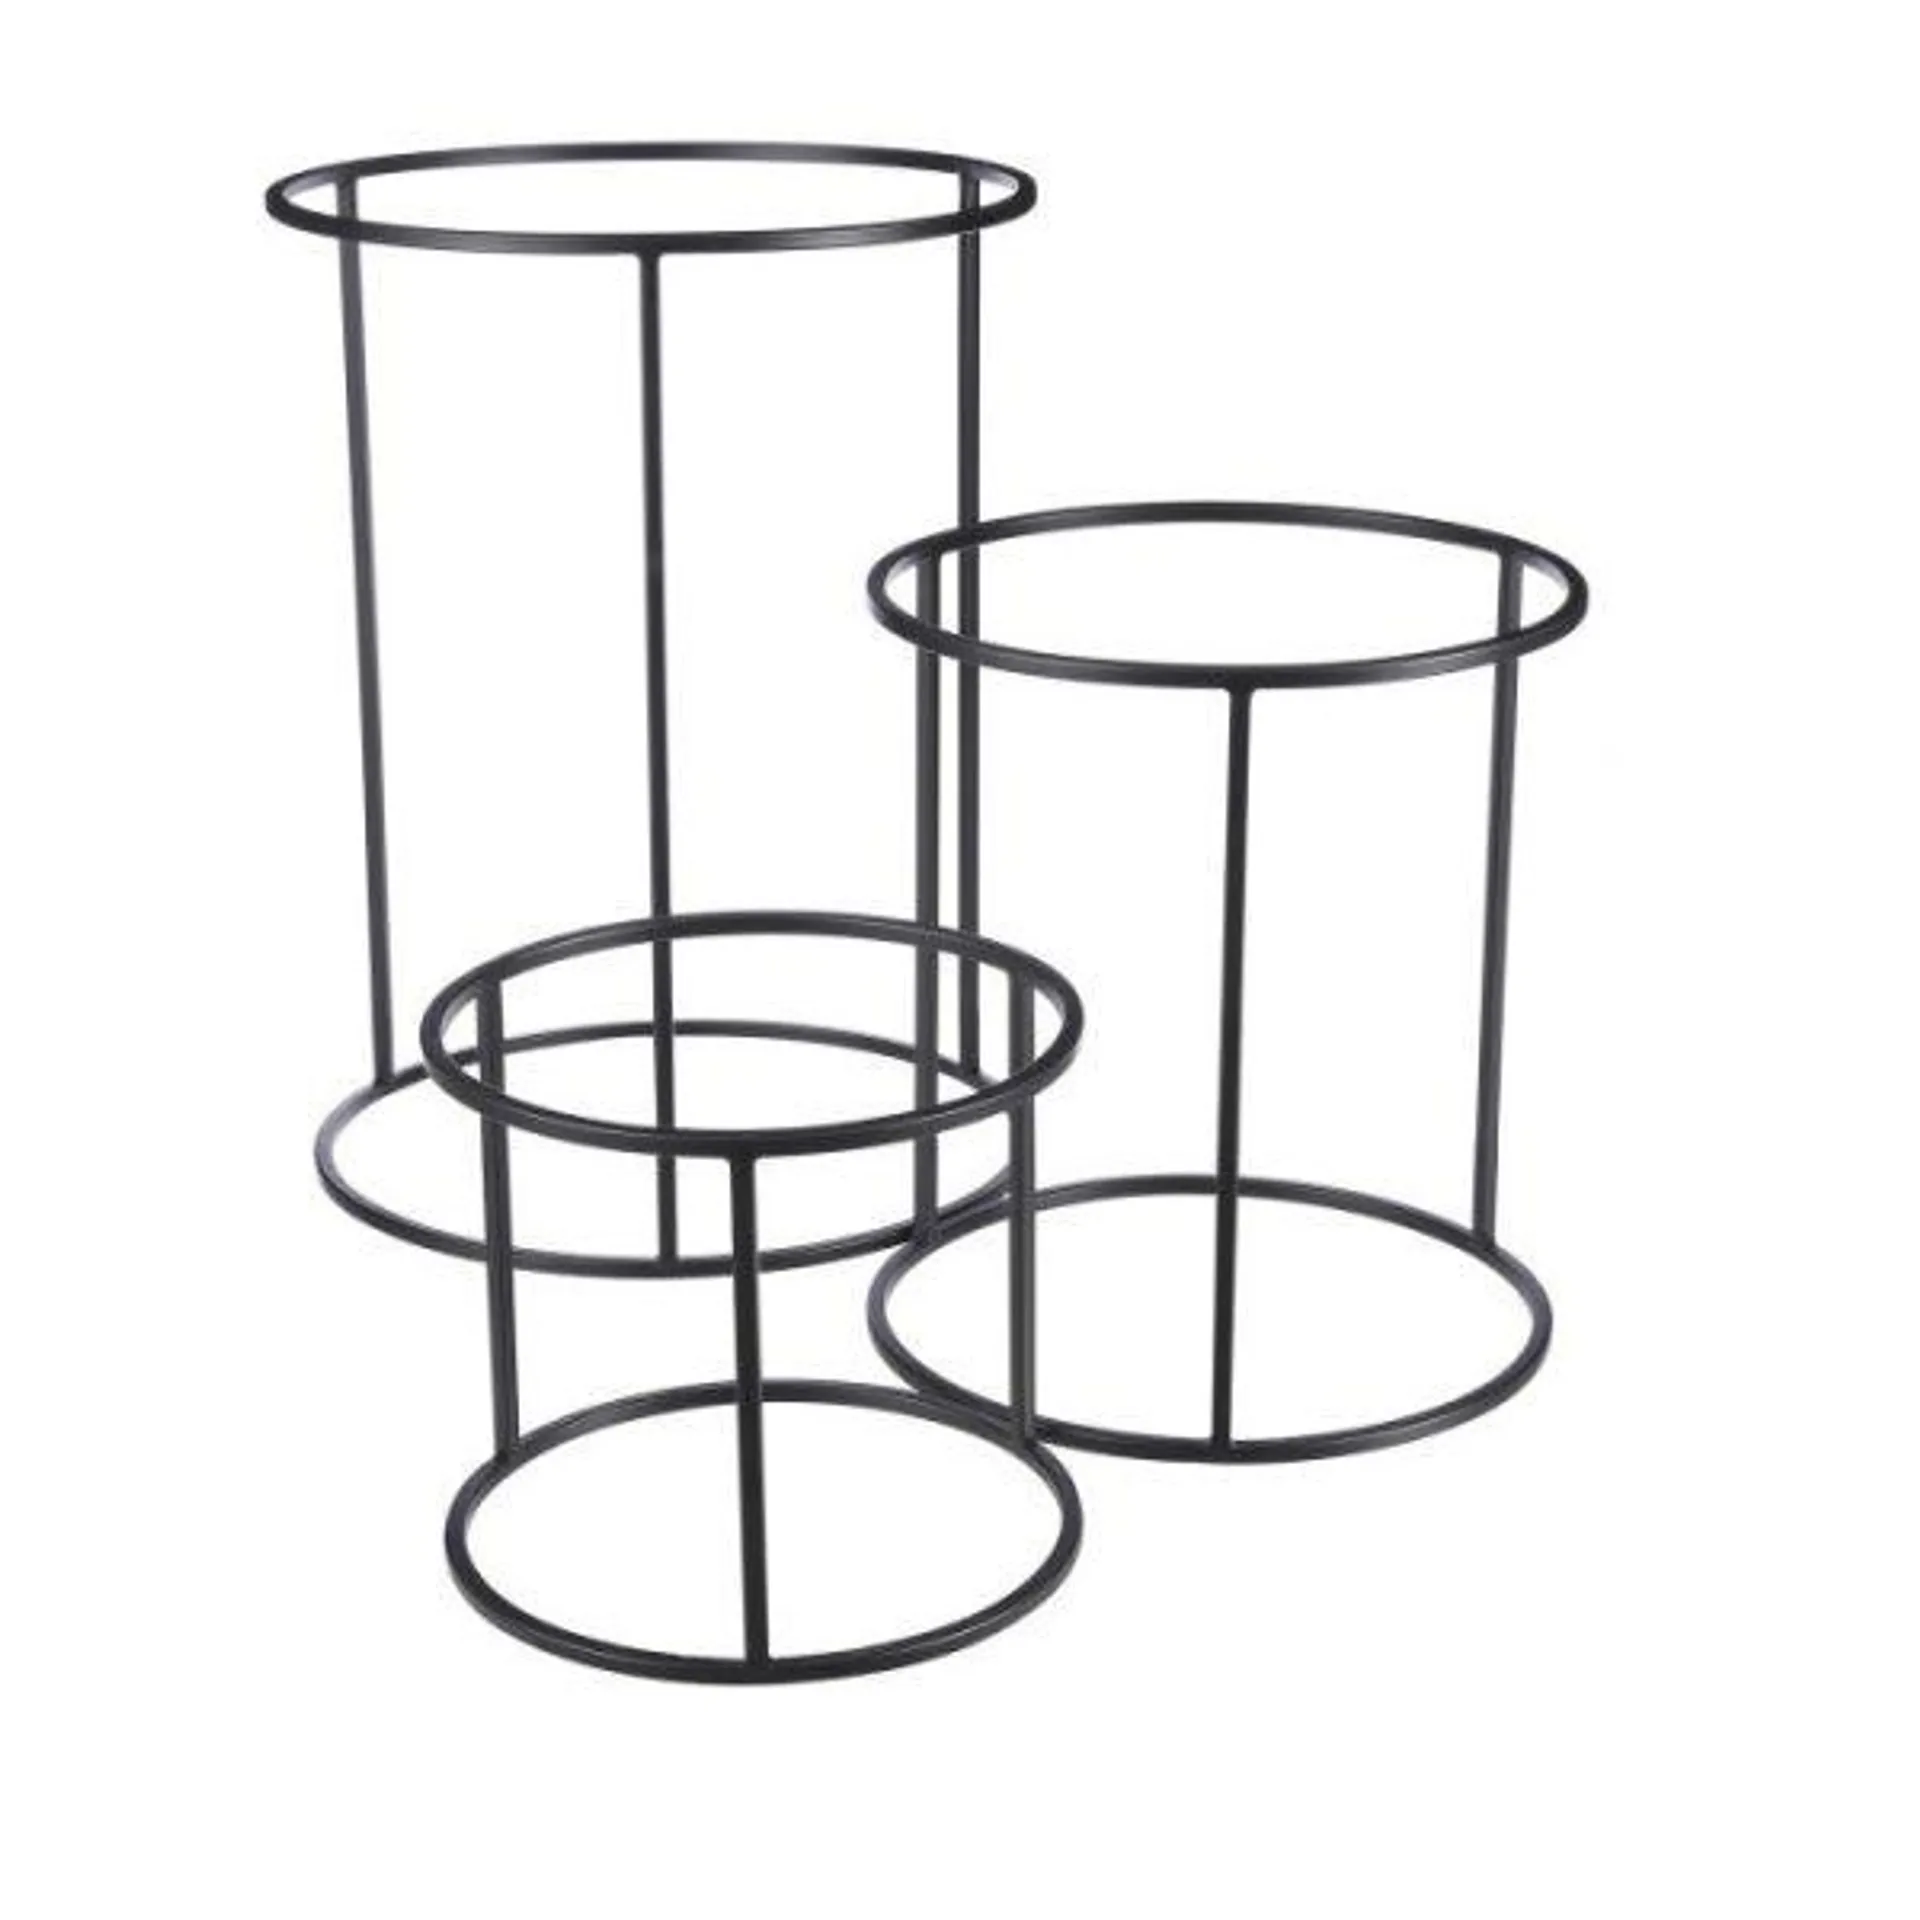 Plant Stand Black – available in three sizes